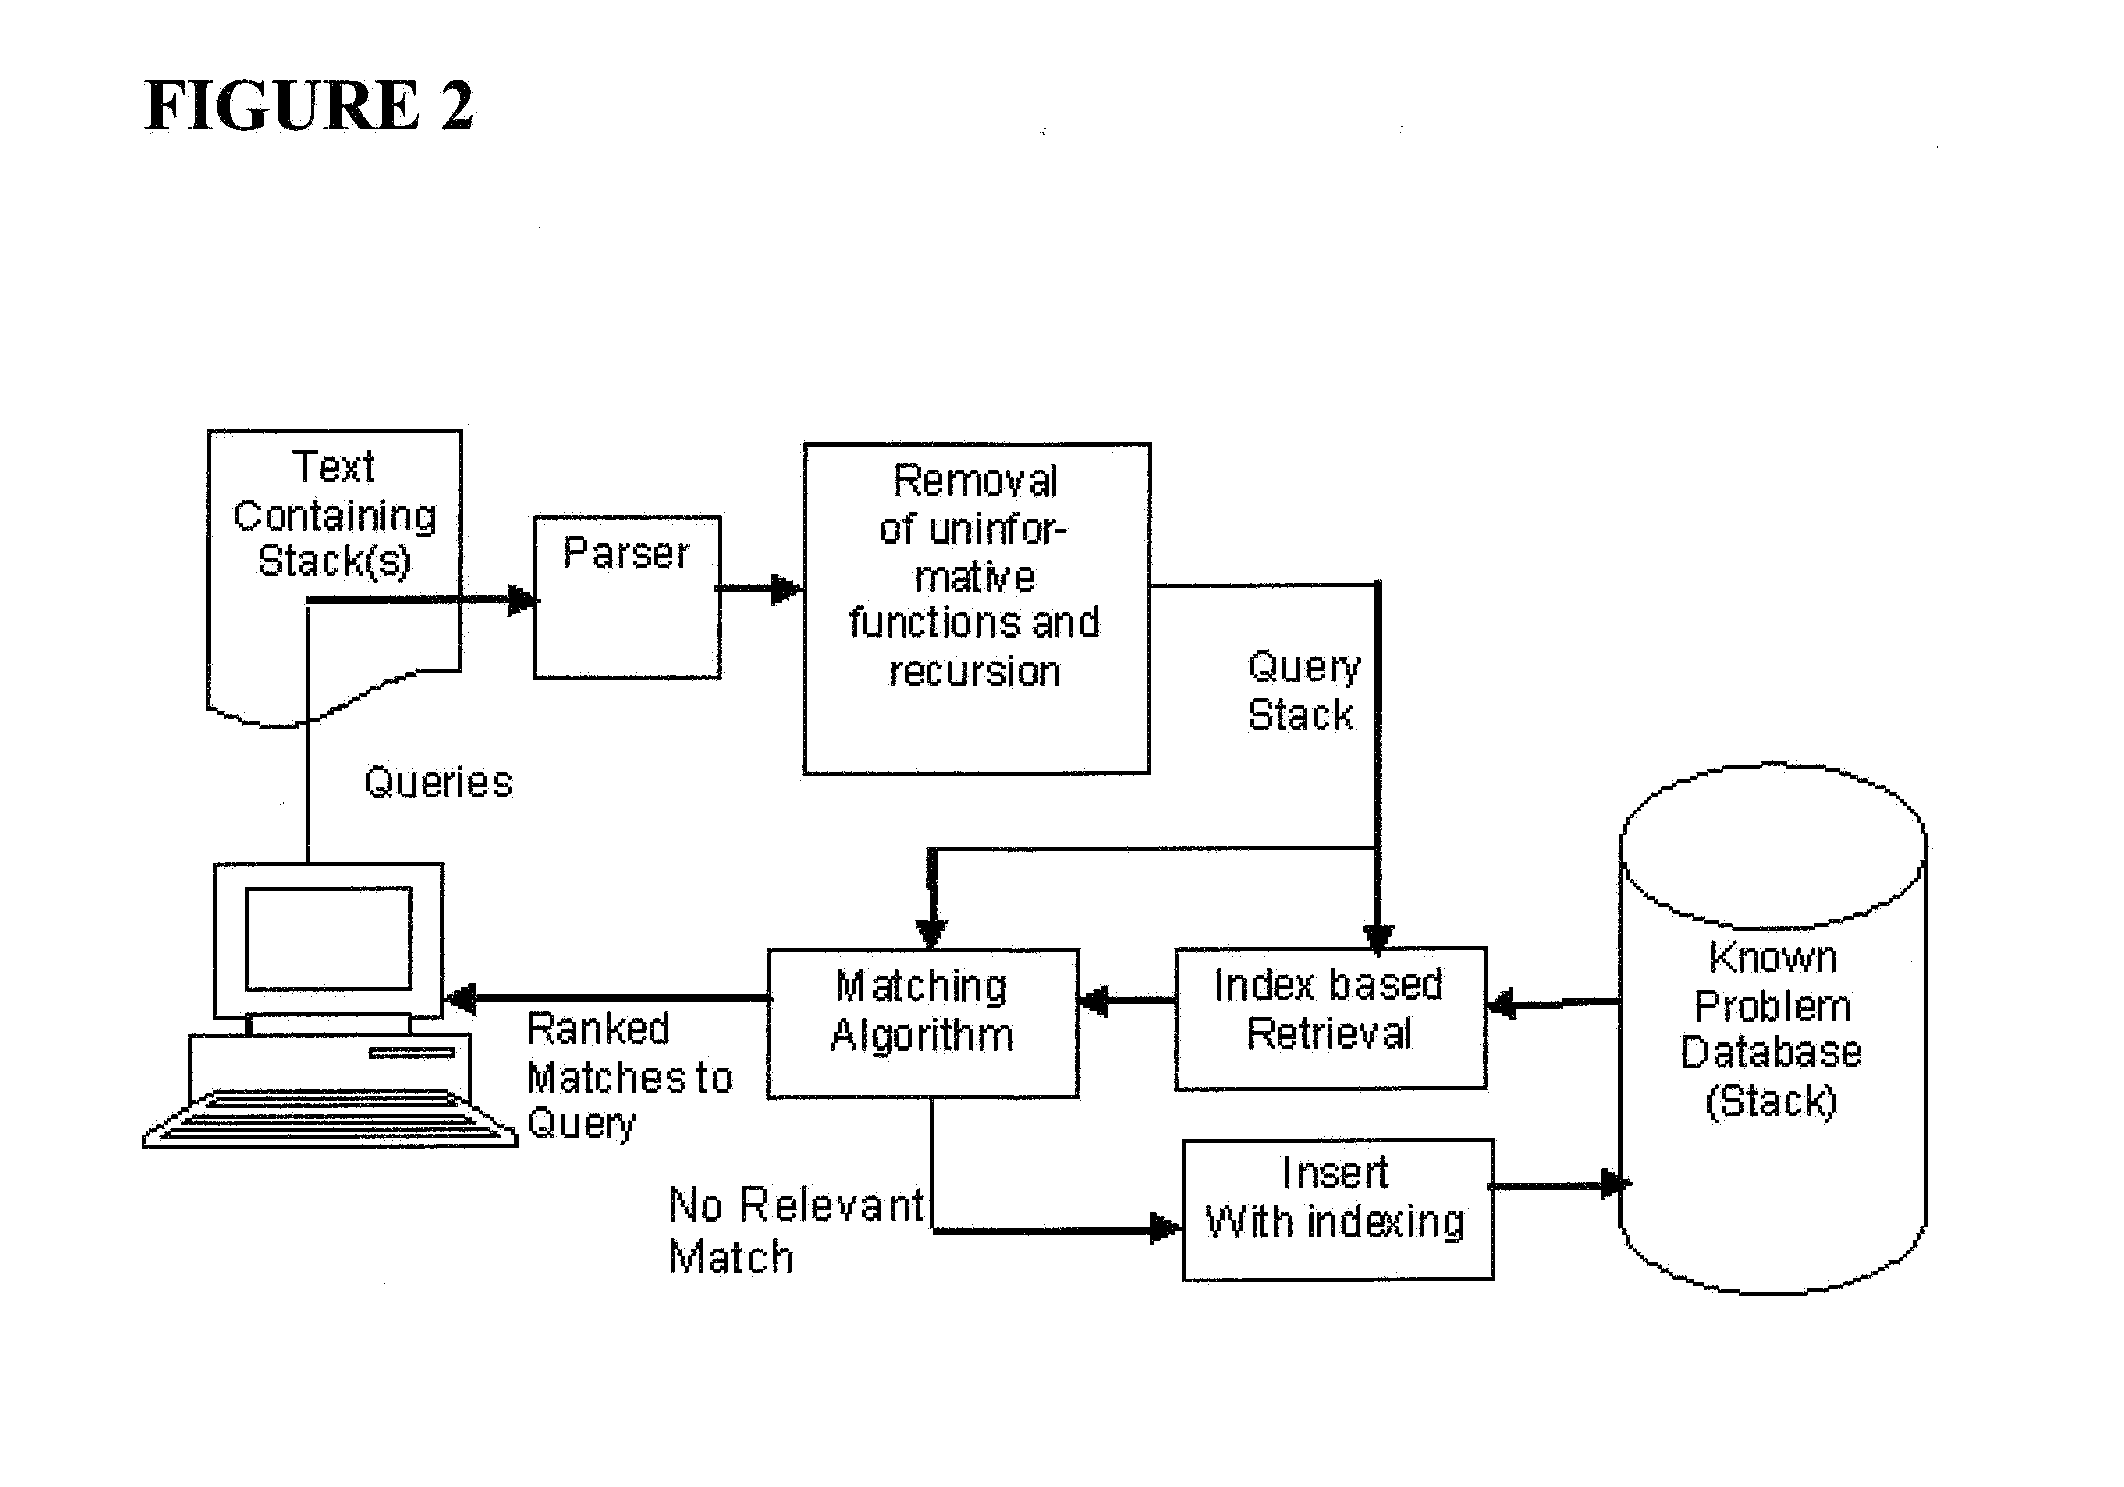 System and method for matching a plurality of ordered sequences with applications to call stack analysis to identify known software problems